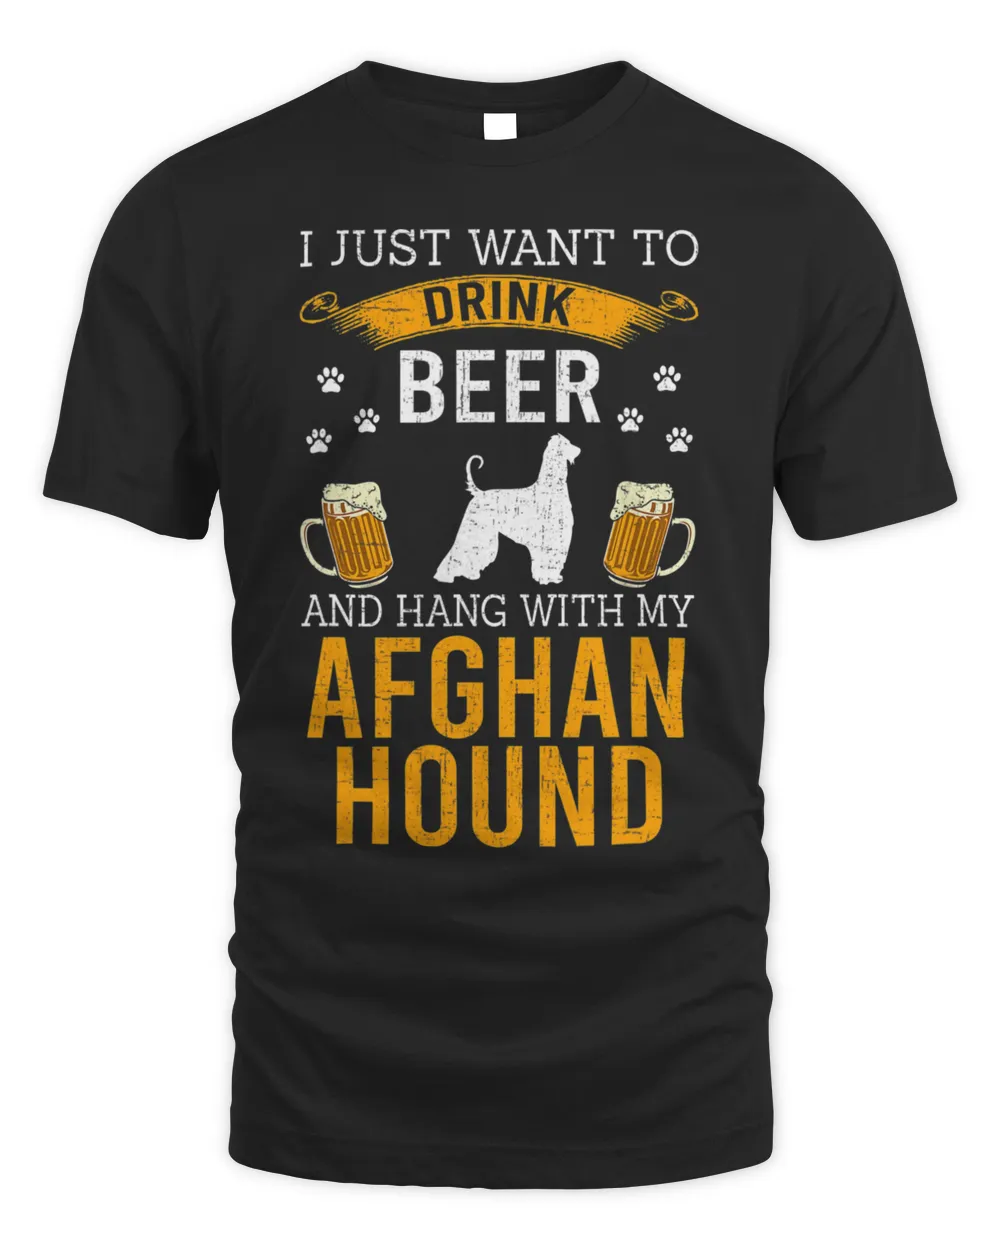 I Just Want To Drink Beer & Hang With My Afghan Hound T-Shirt